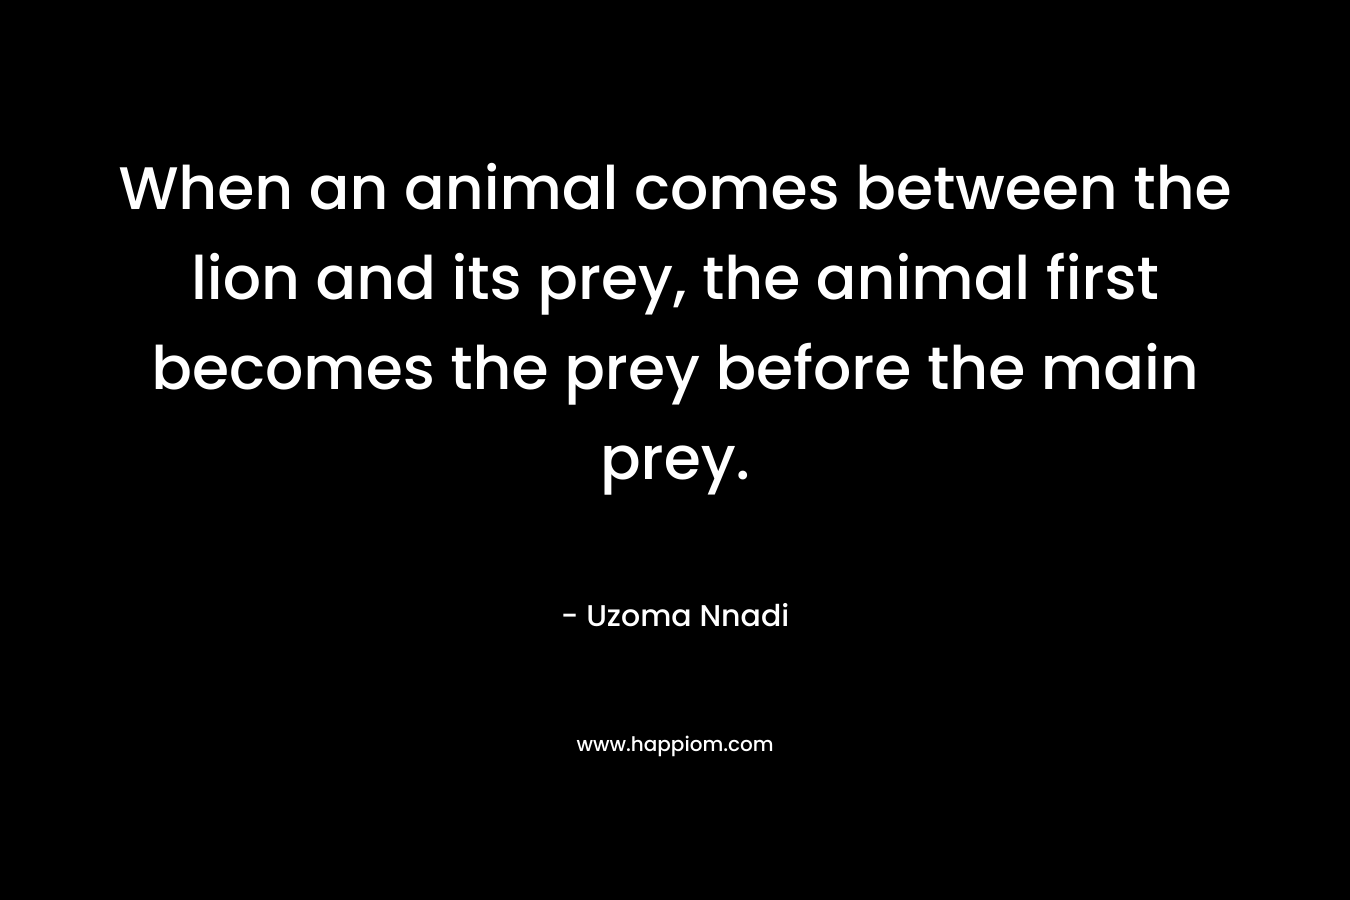 When an animal comes between the lion and its prey, the animal first becomes the prey before the main prey. – Uzoma Nnadi